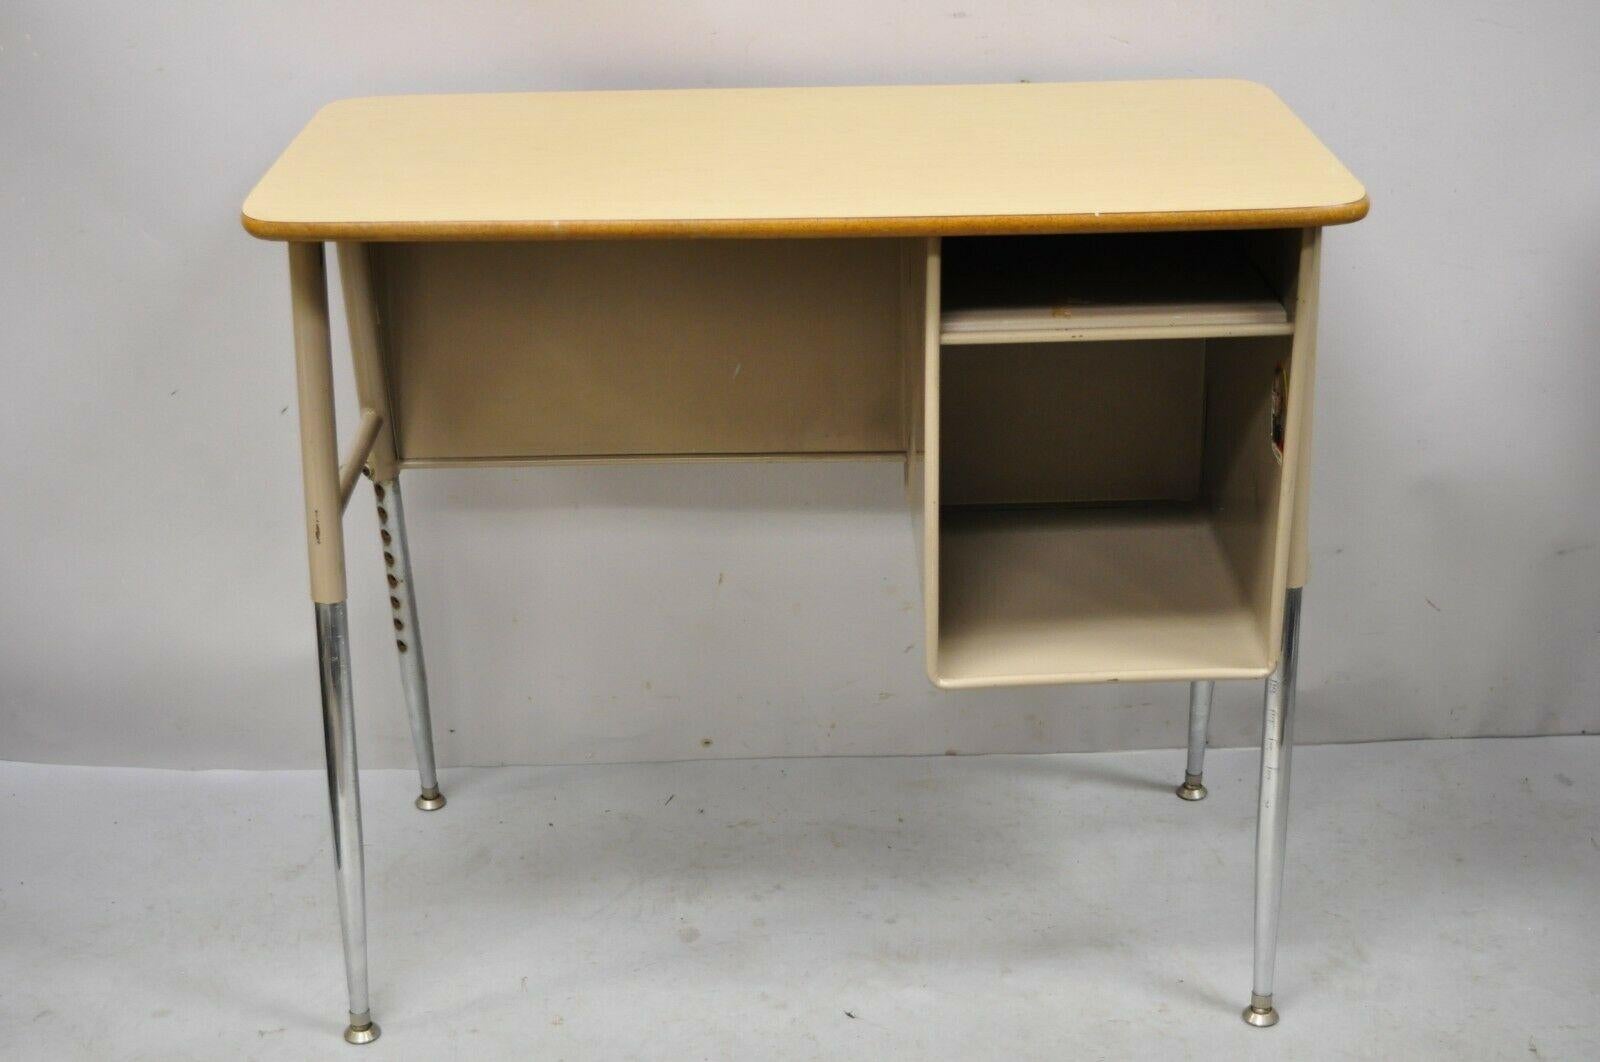 Vintage Adjustable Height Metal School Desk With Laminate Top. Item features a wood grain laminate top, adjustable height metal base, very nice vintage item, sleek sculptural form. Mid to Late 20th Century. Measurements: 29